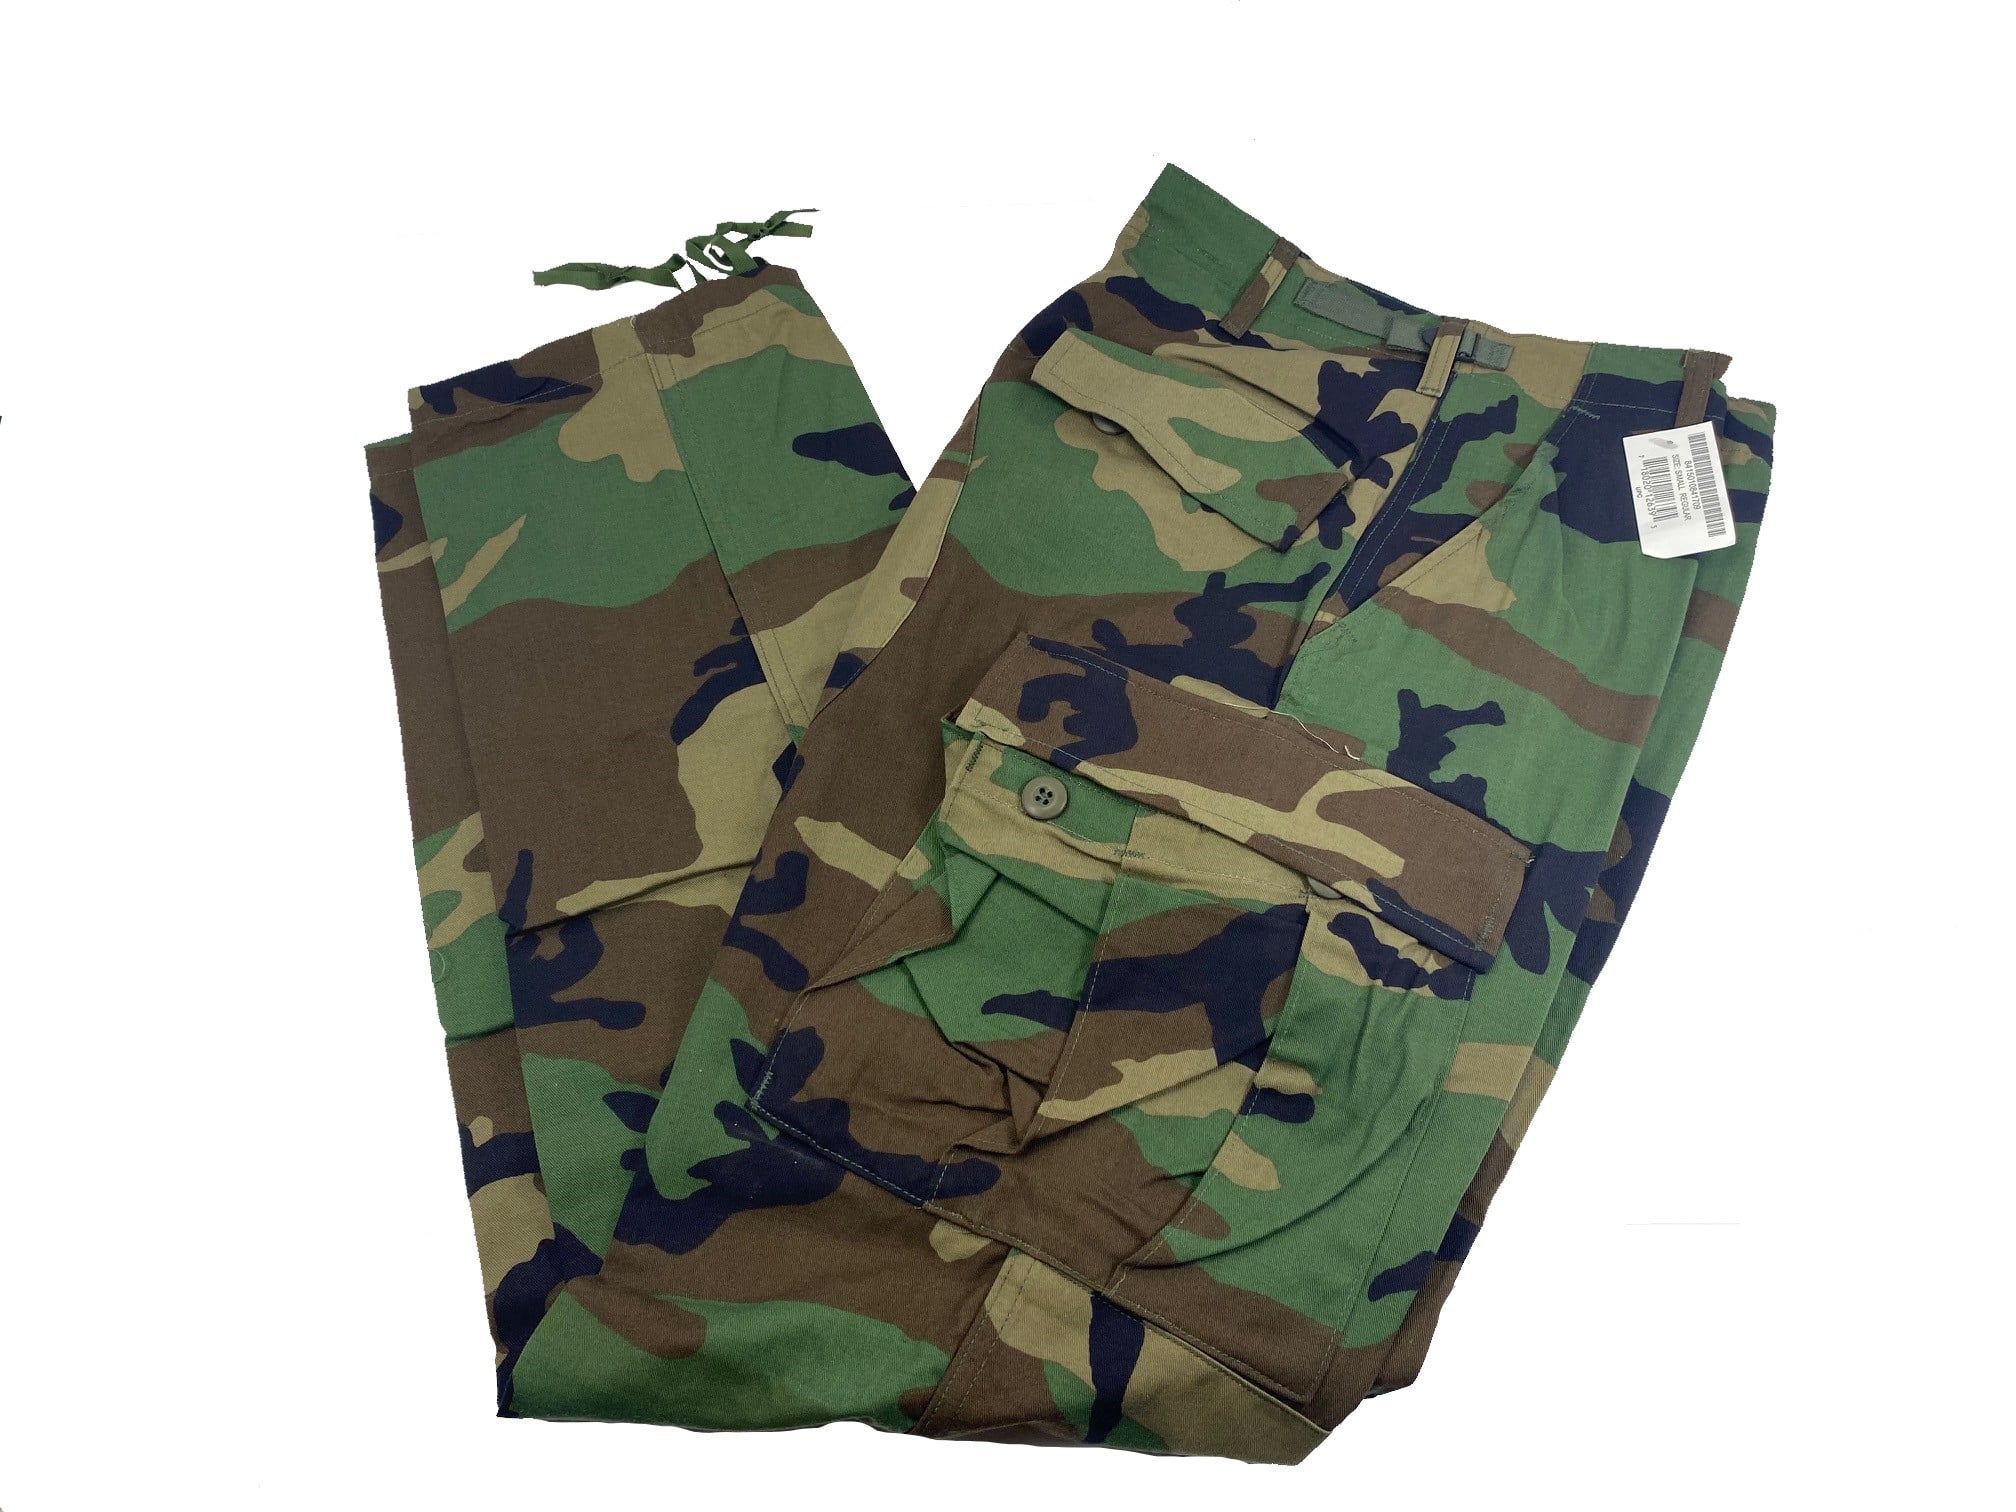 Buy Woodland Trousers online  Men  25 products  FASHIOLAin